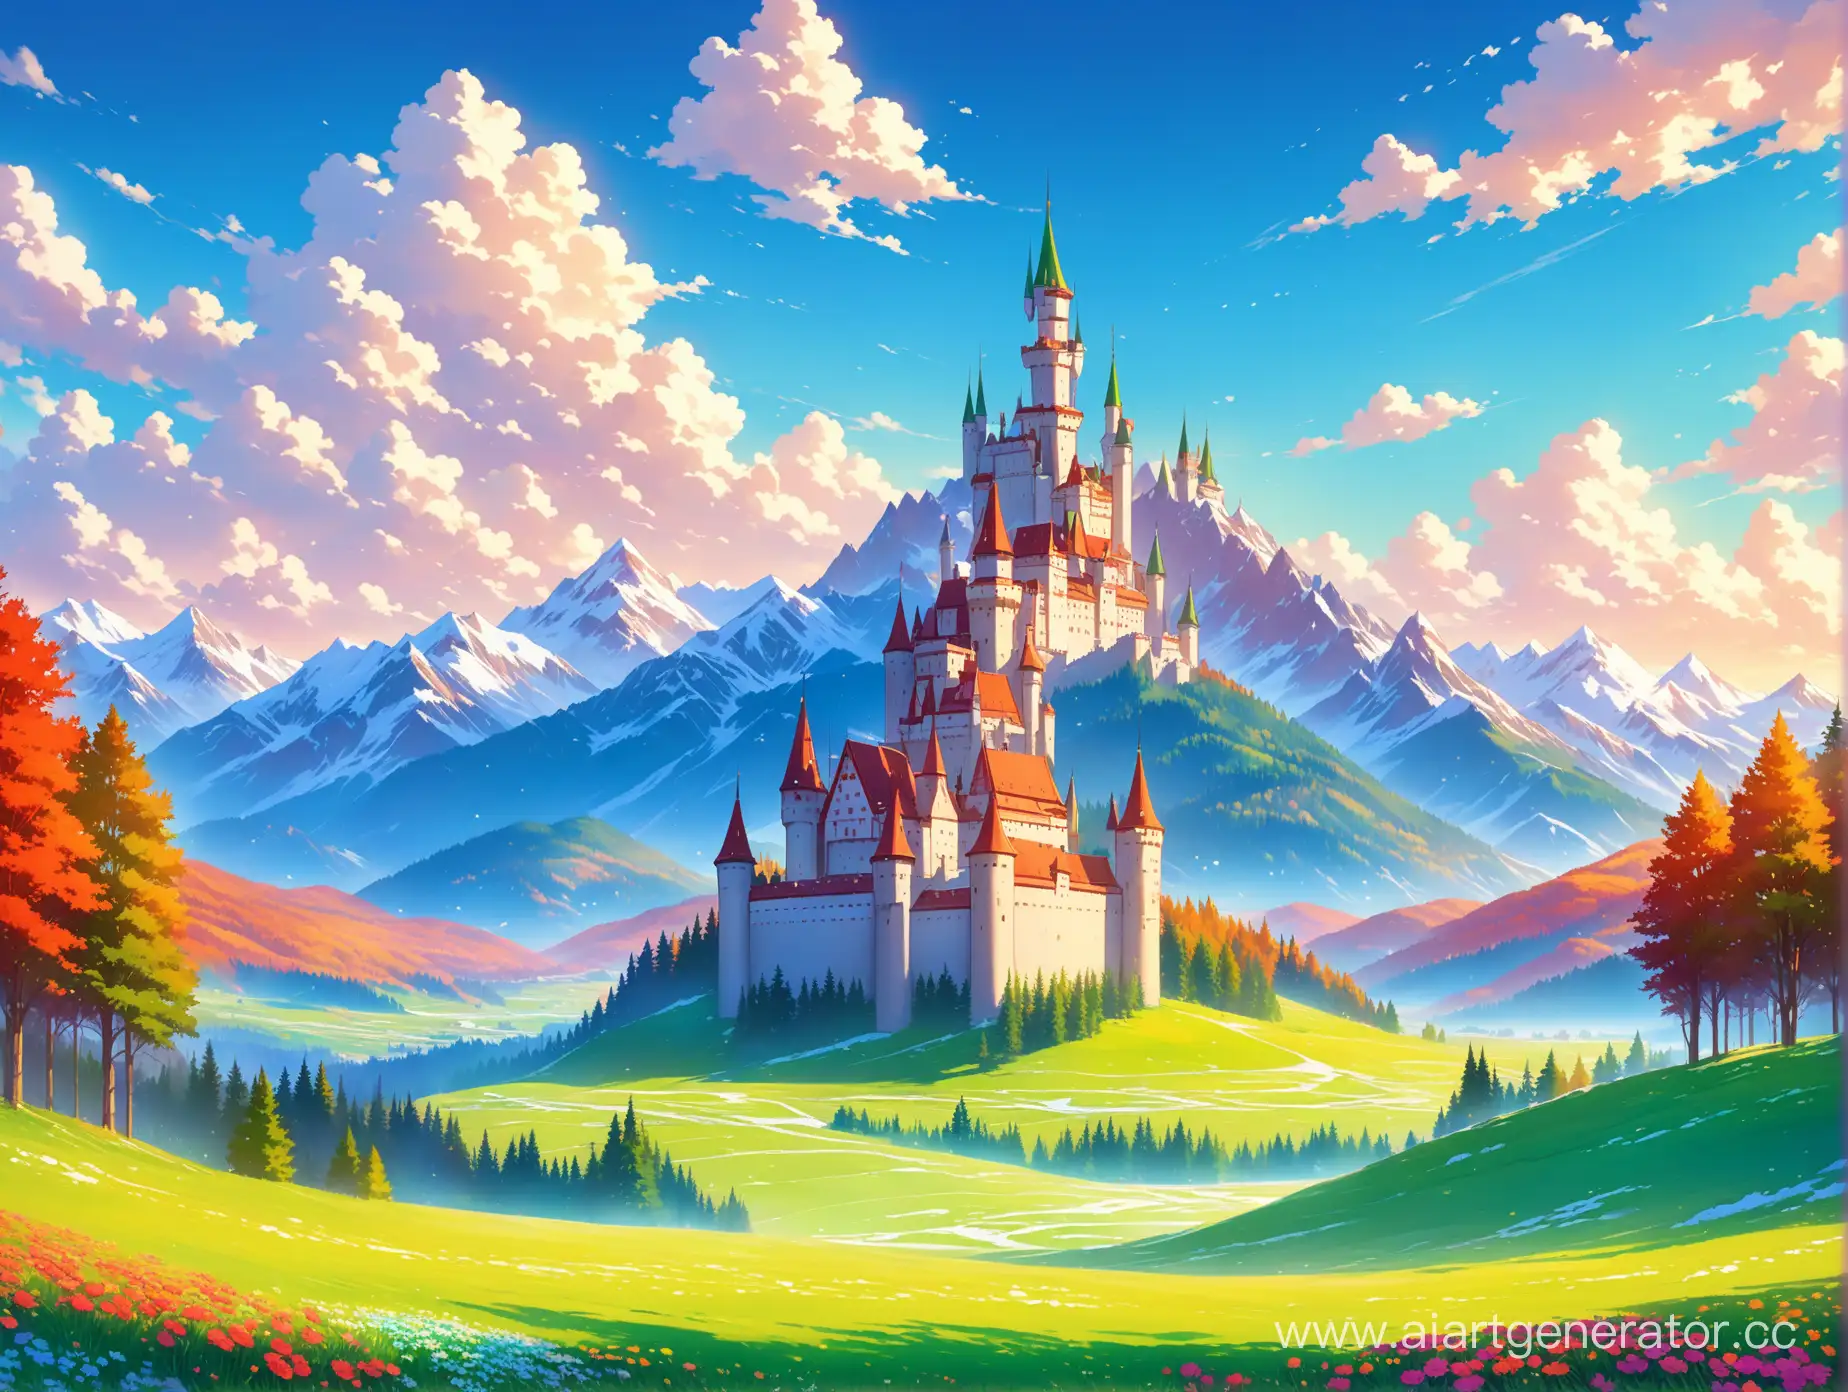 Enchanted-Castle-in-a-Vibrant-Field-with-Majestic-Mountains